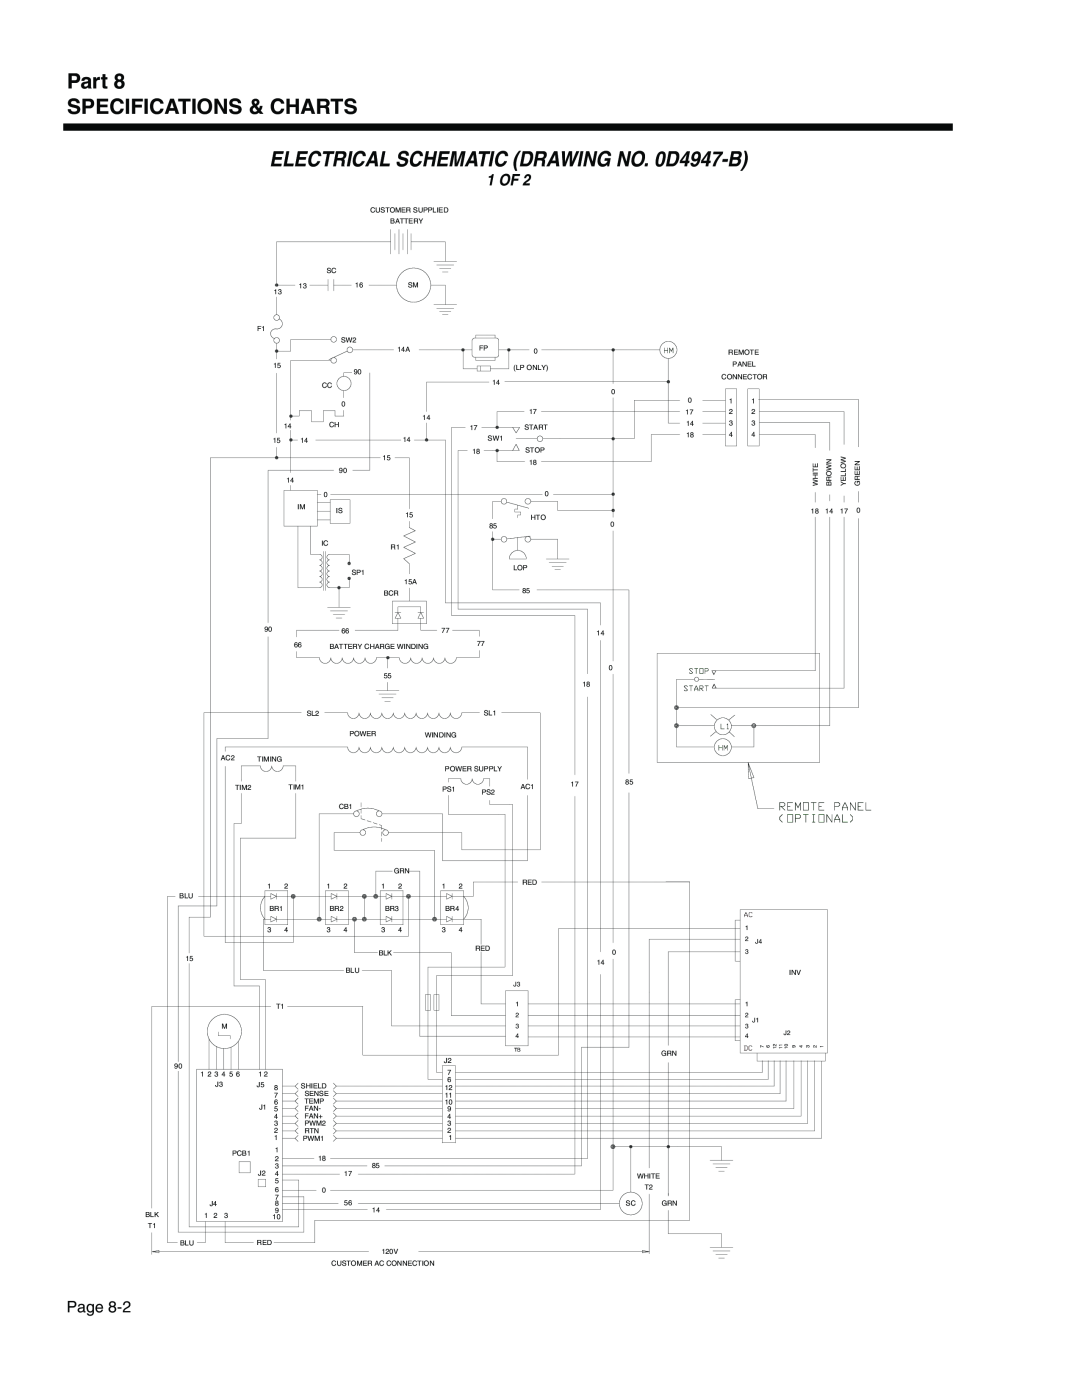 Generac Power Systems 940-2, 941-2 Part SPECIFICATIONS & CHARTS, ELECTRICAL SCHEMATIC DRAWING NO. 0D4947-B, 1 OF, Page 